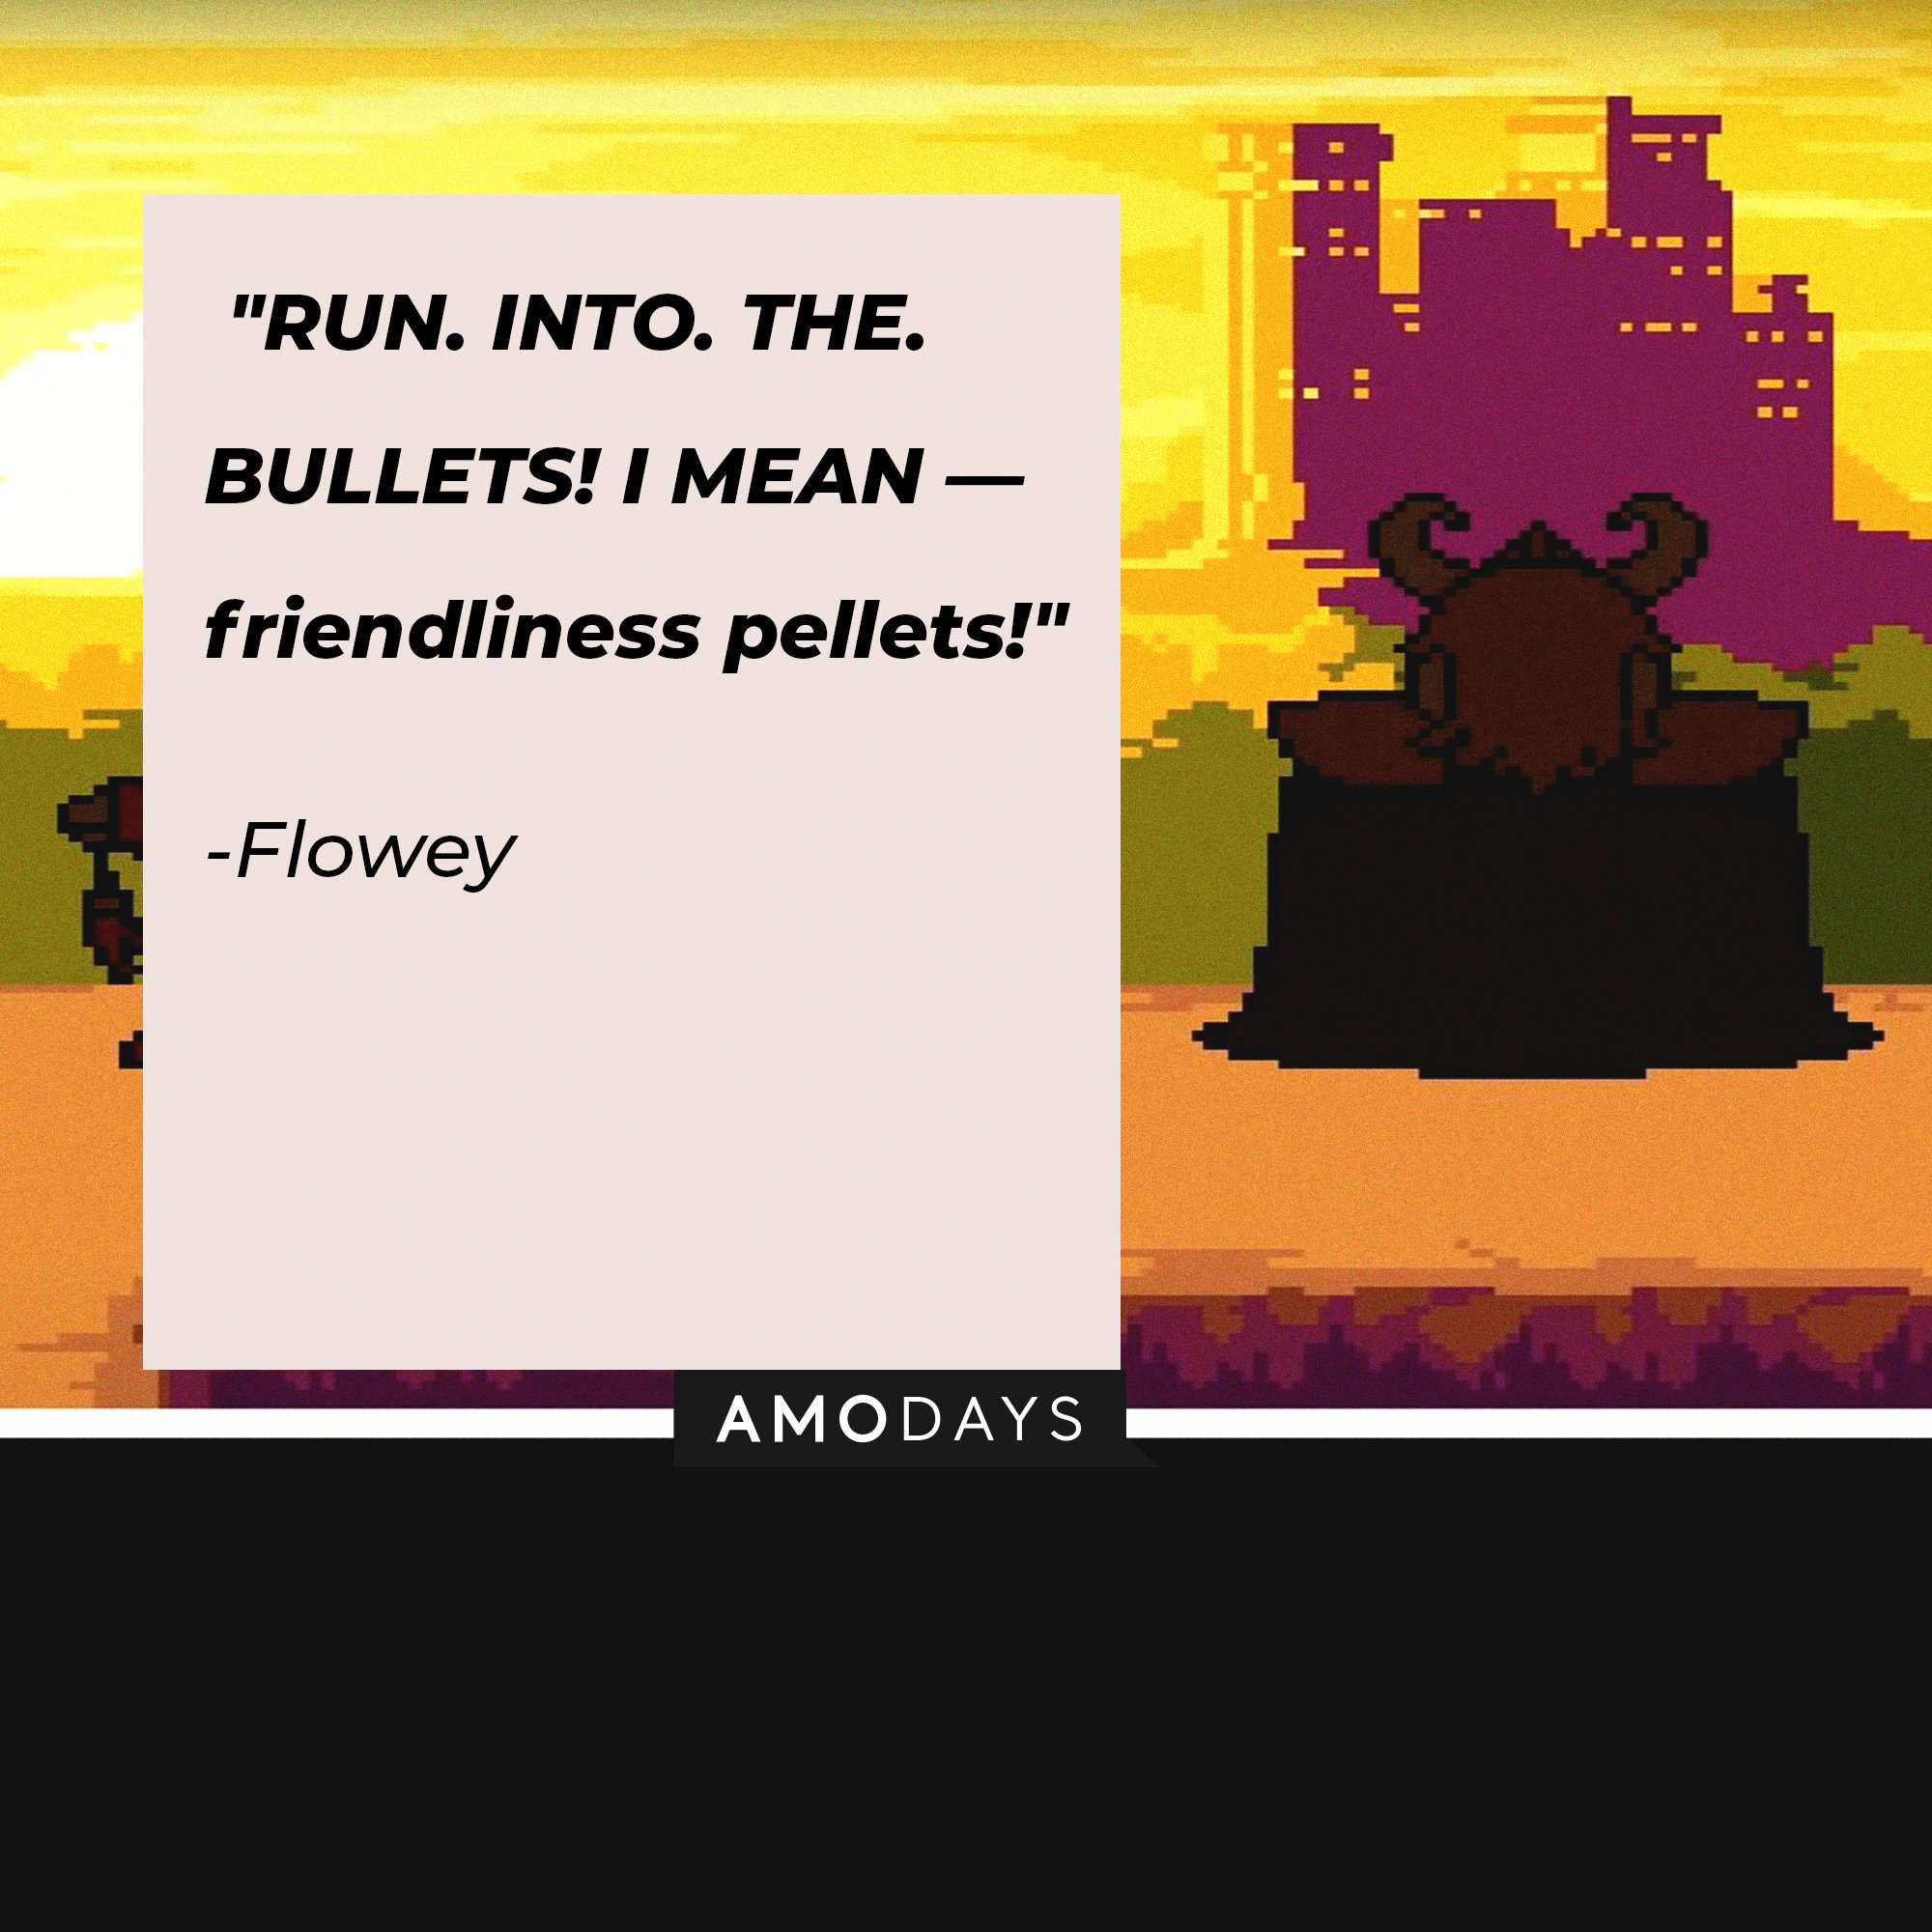 Flowey’s quote: "RUN. INTO. THE. BULLETS! I MEAN — friendliness pellets!" | Image: AmoDays